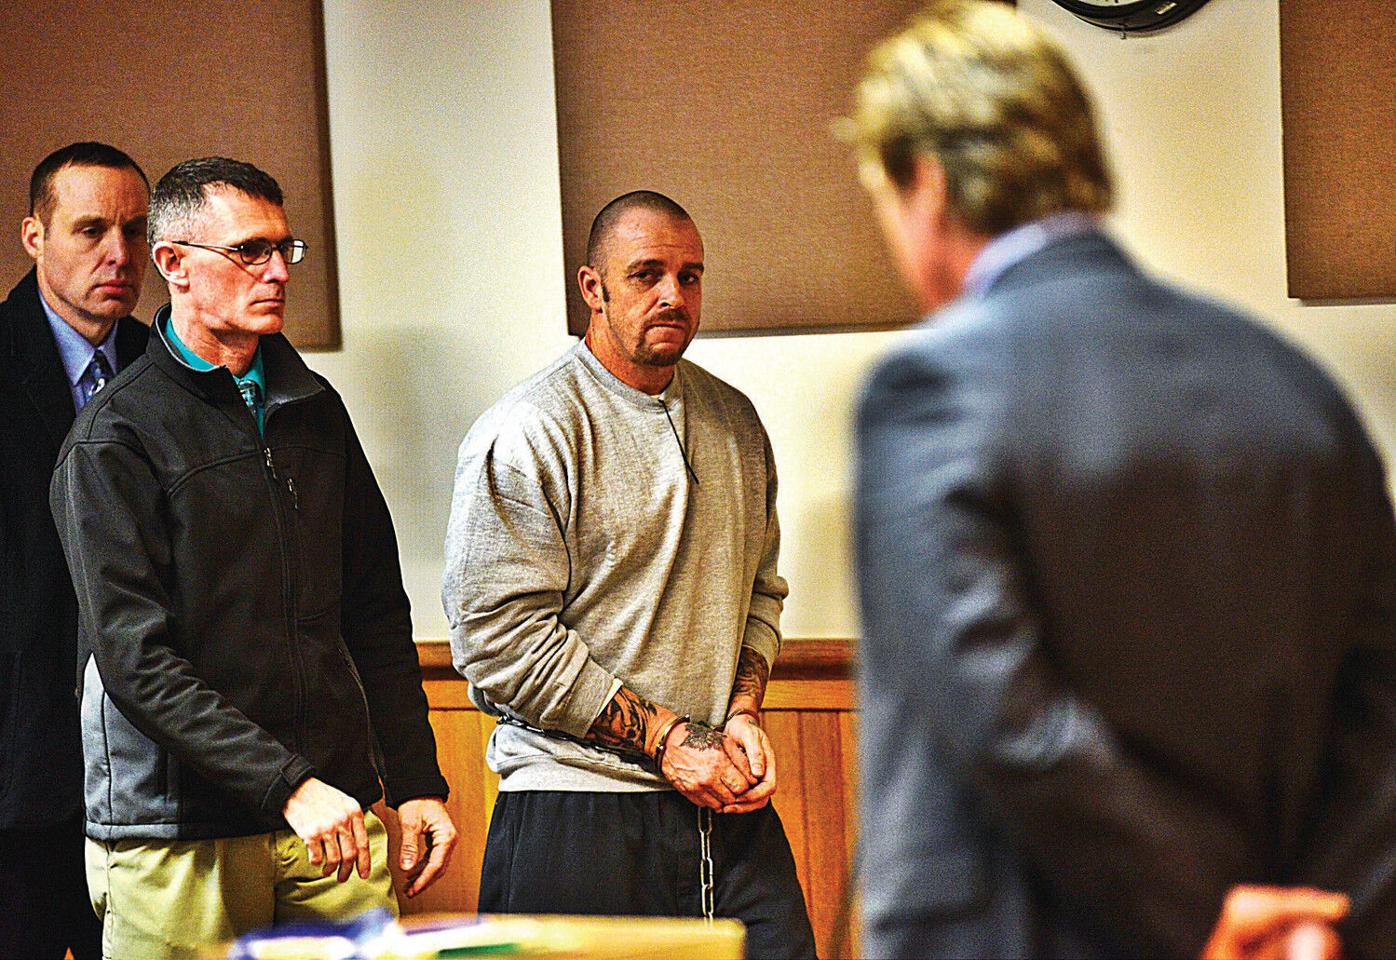 Orwat pleads not guilty, held without bail